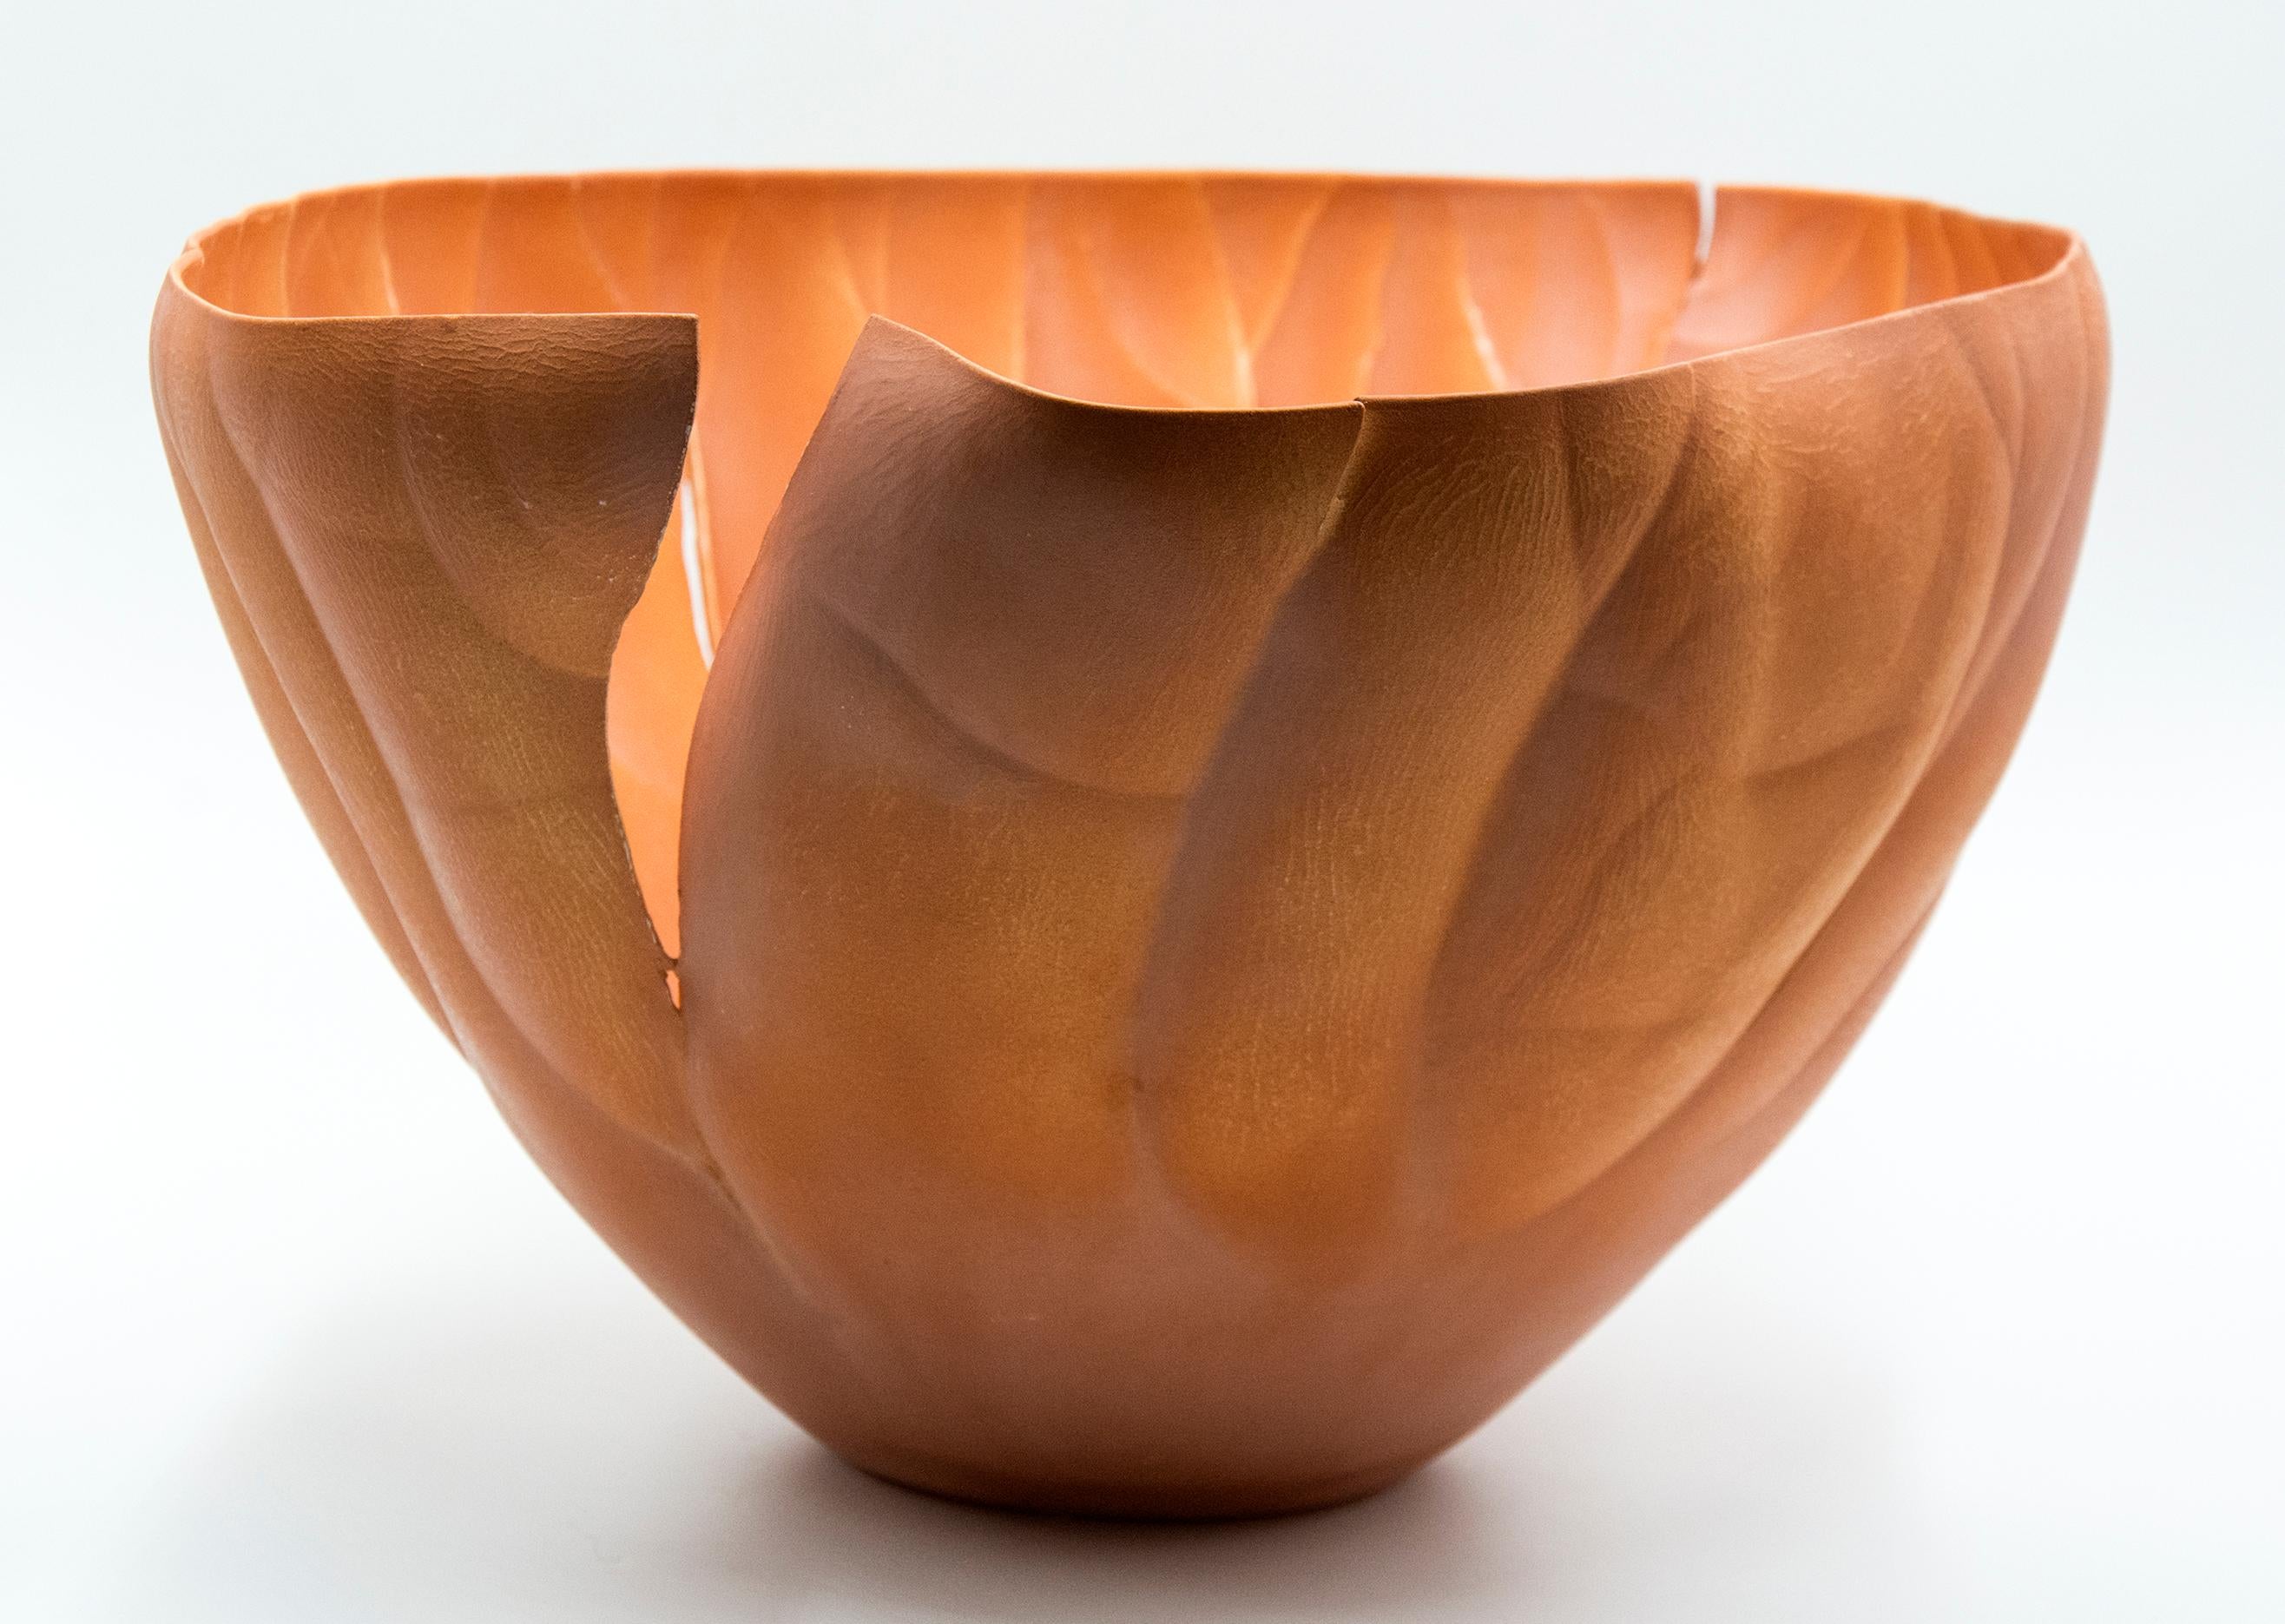 Paula Murray Abstract Sculpture - Canyon Crevice Bowl - intricate, hand-shaped, porcelain clay vessel